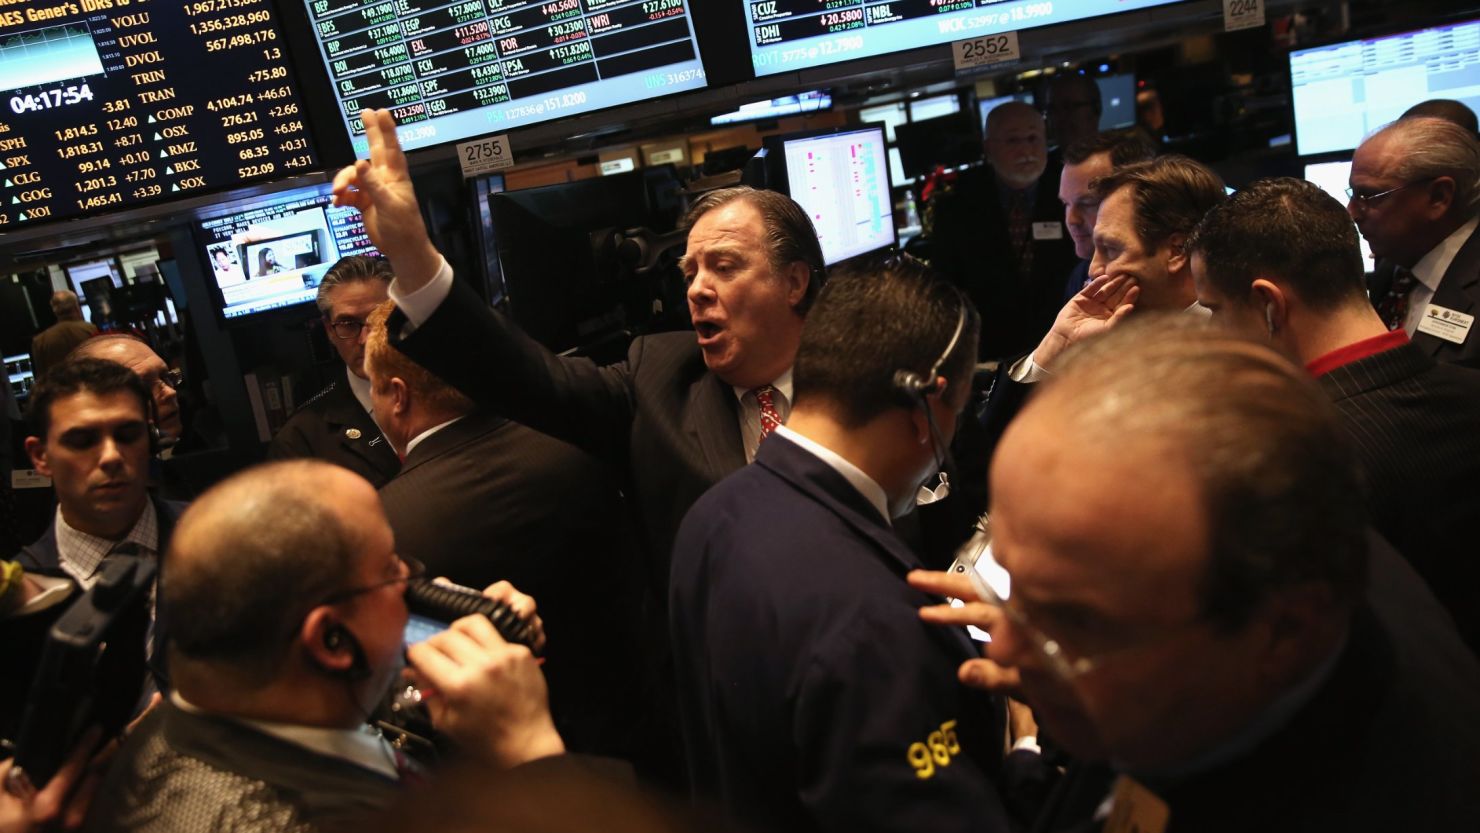 Traders work the floor of the New York Stock Exchange. (File photo)